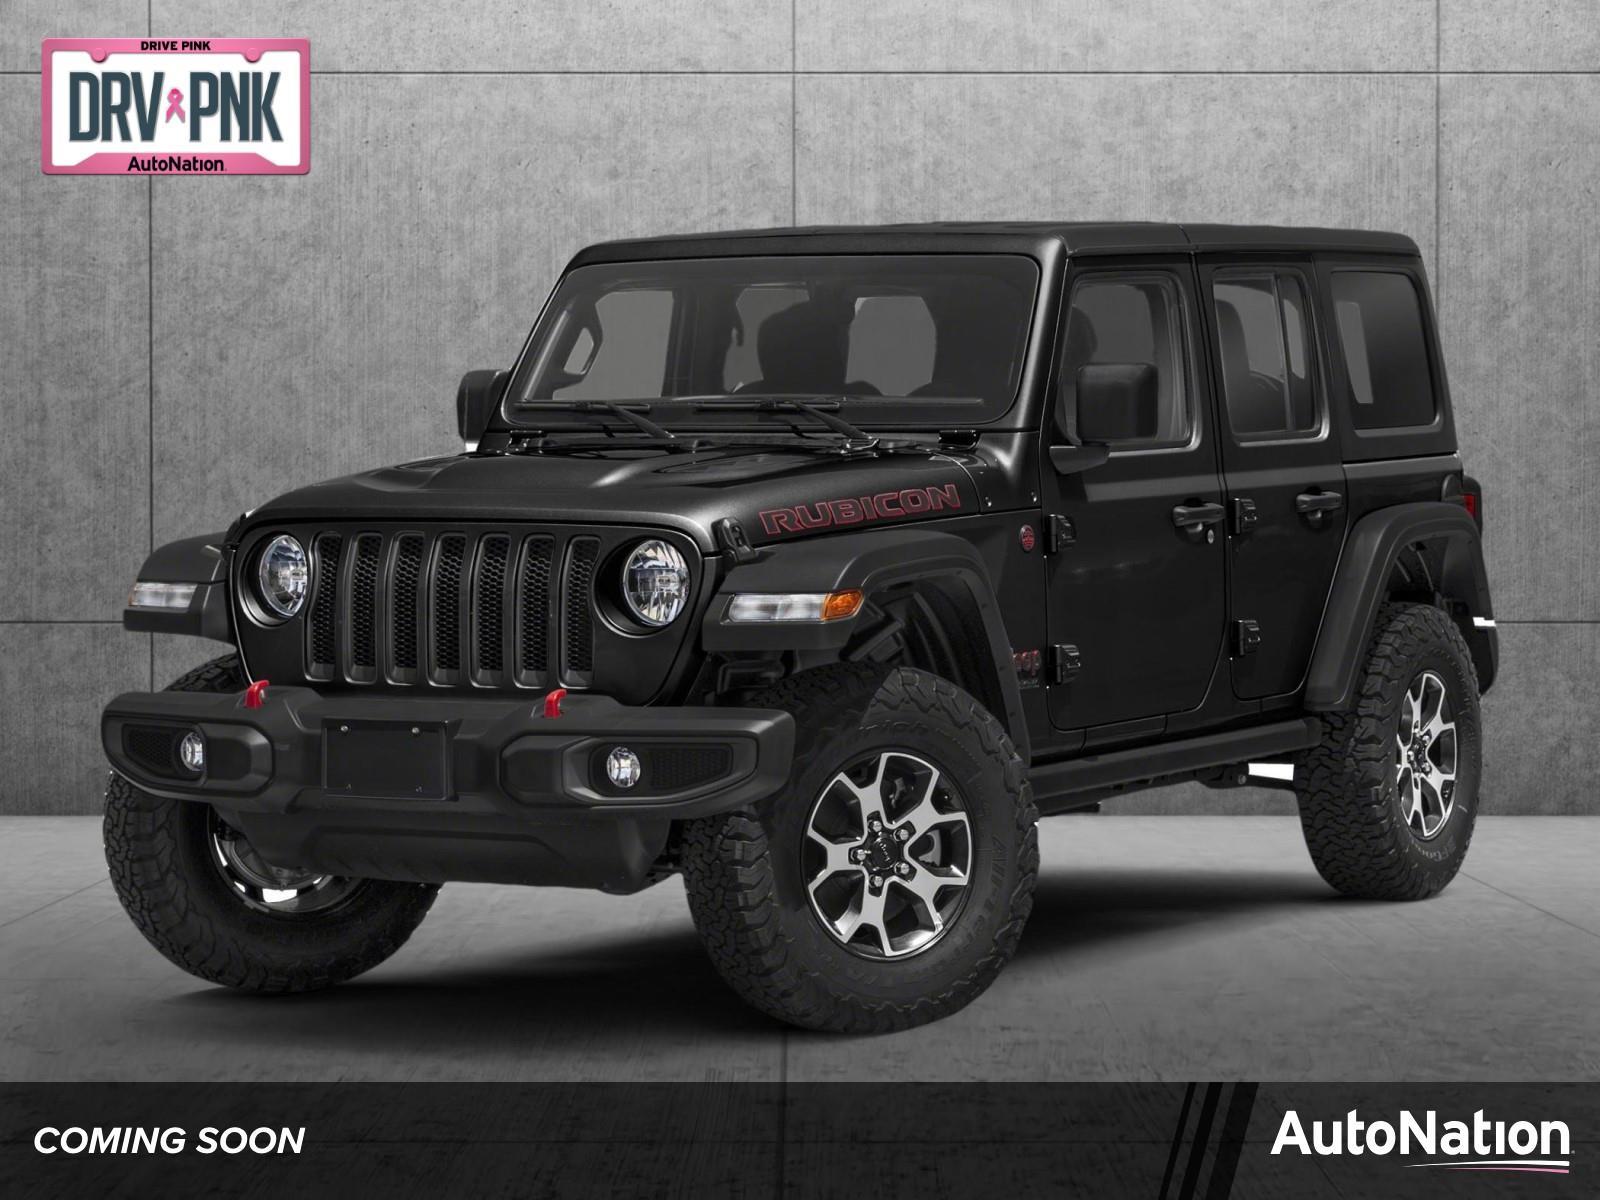 NEW 2023 Jeep Wrangler for sale in Roseville, CA 95661 - AutoNation